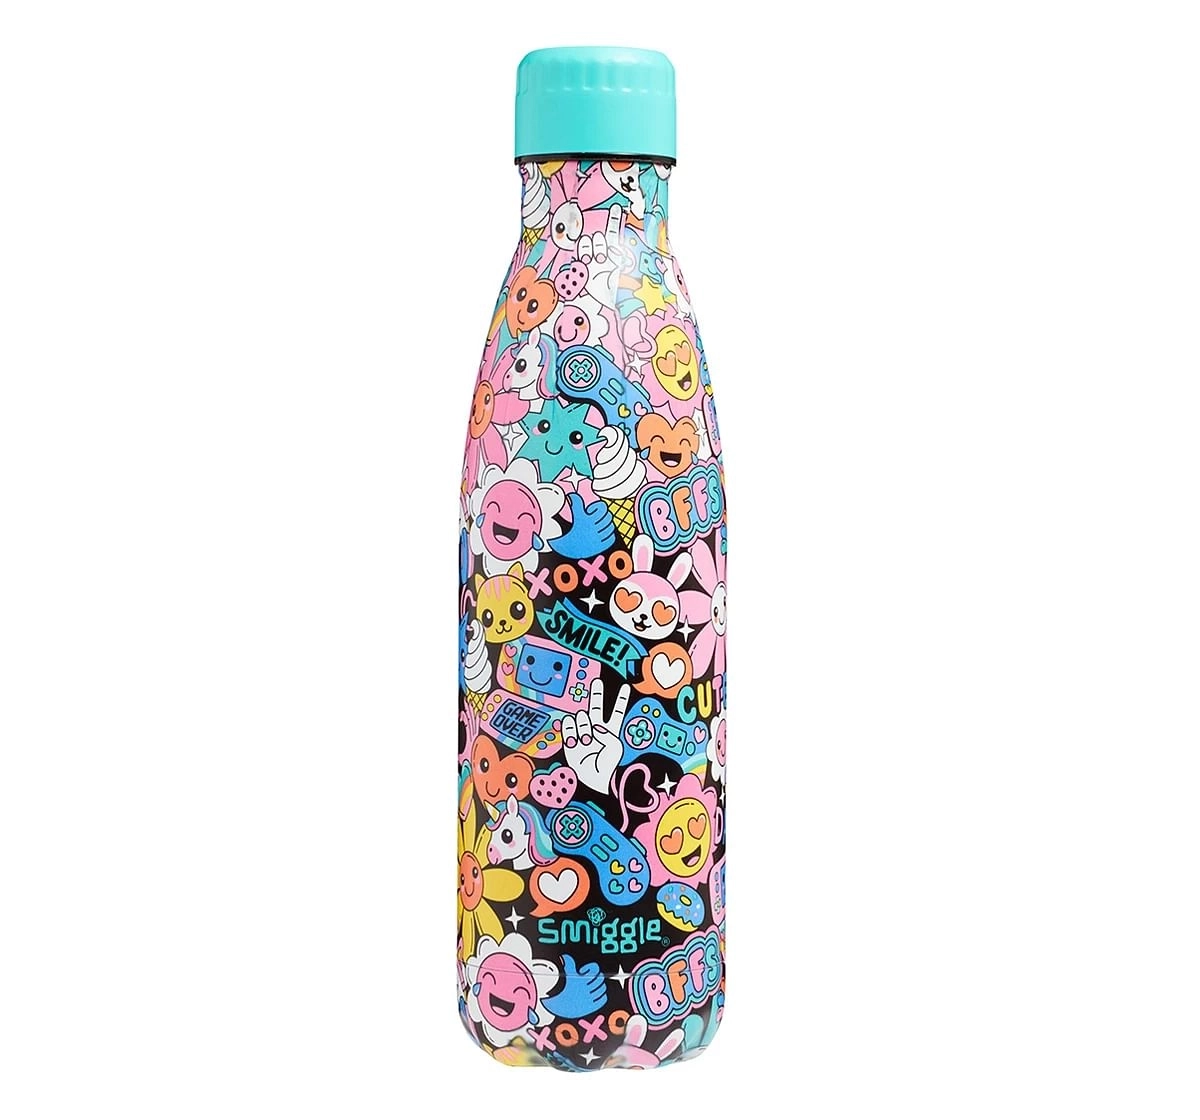 Smiggle Bright Side Insulated Stainless Steel Wonder Drink Bottle 500ml for Kids 3Y+, Multicolour